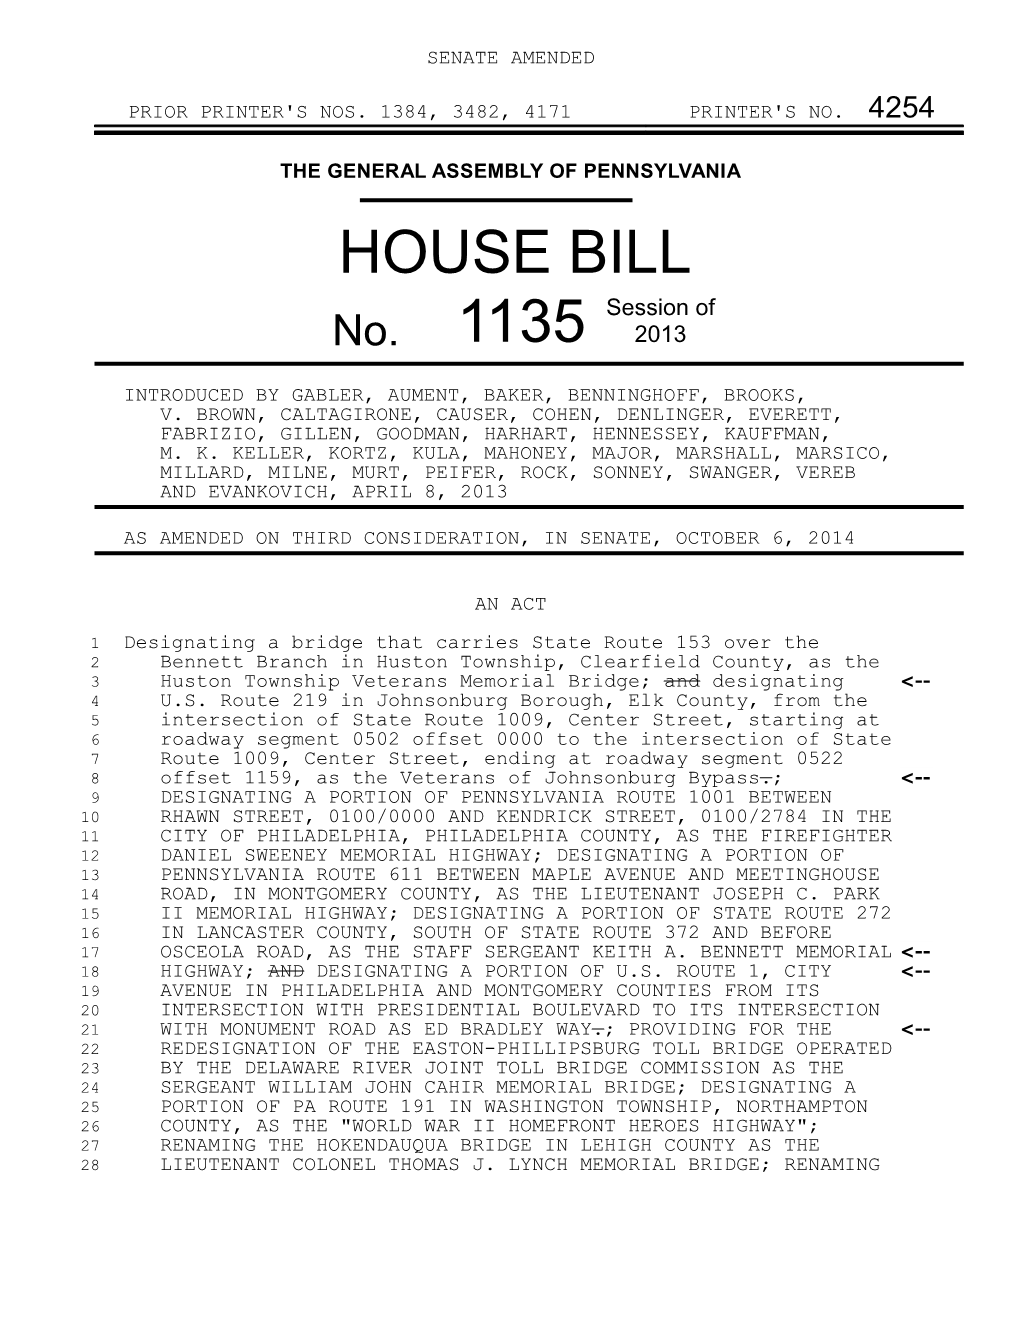 HOUSE BILL Session of No